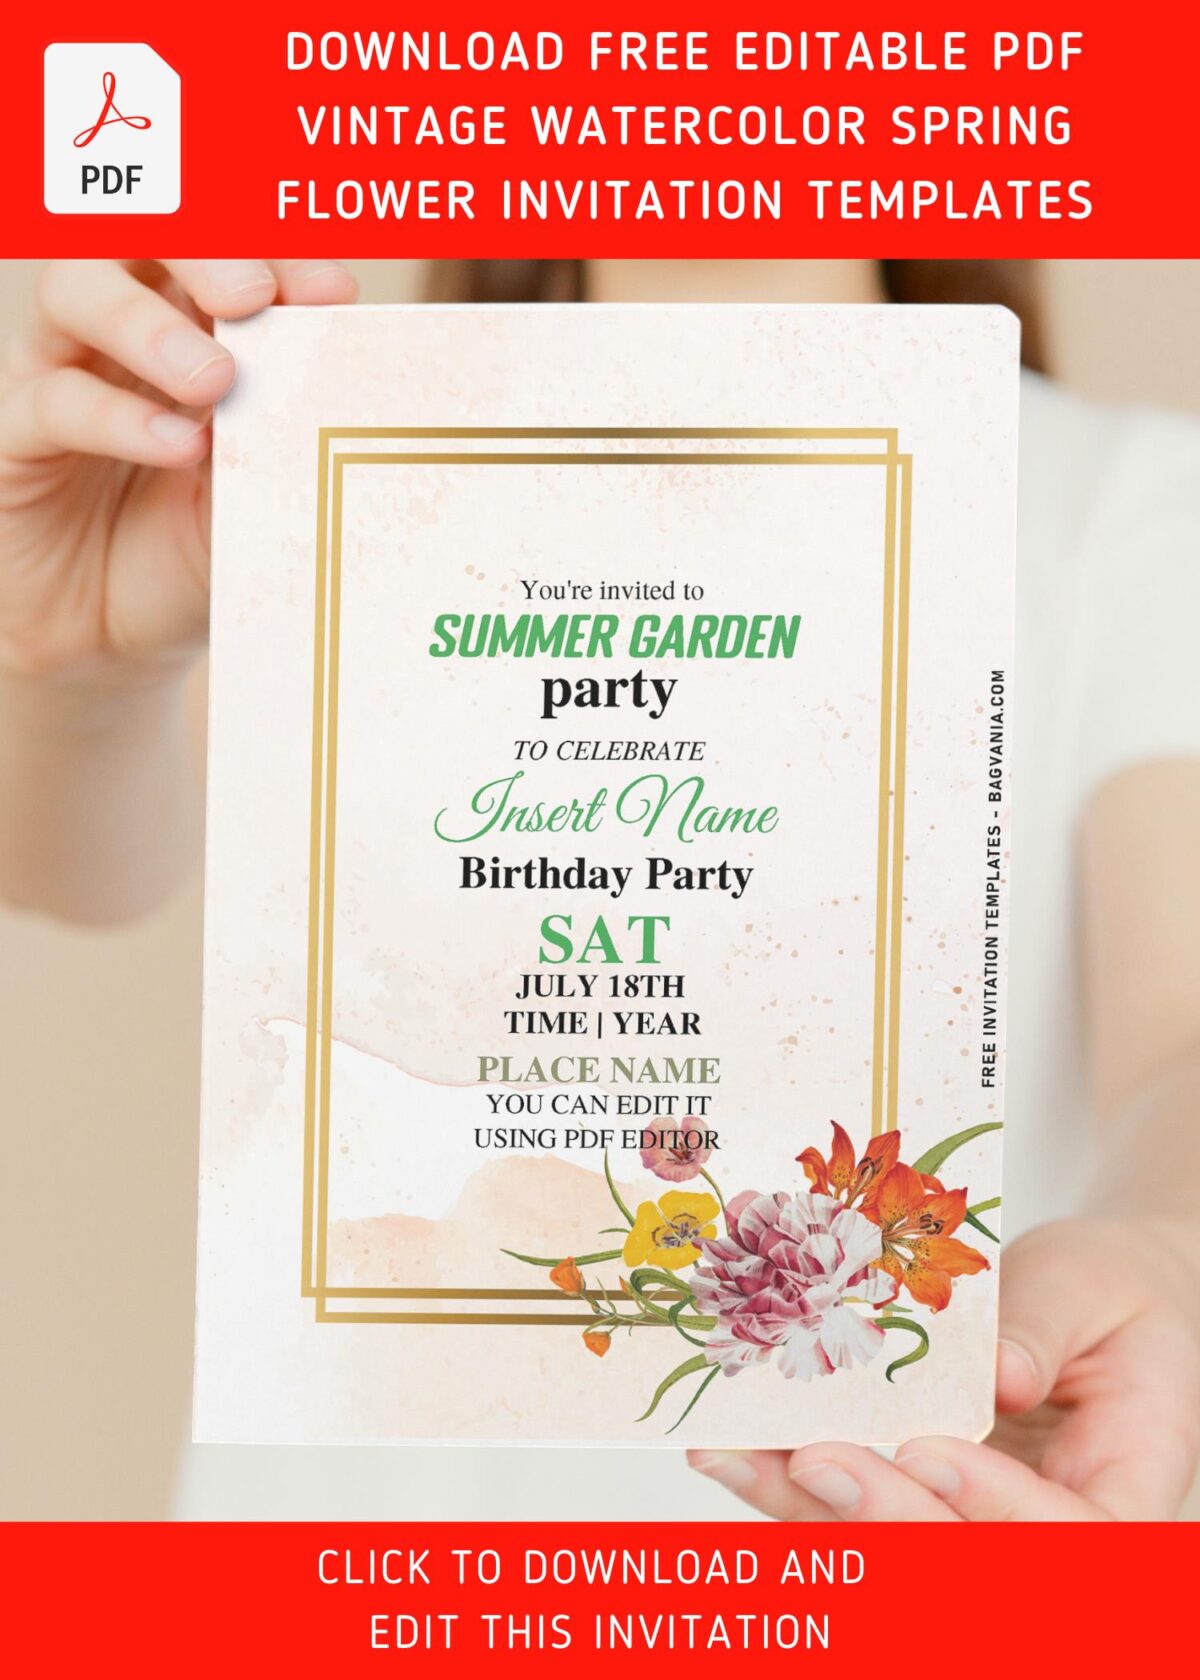 (Free Editable PDF) Vintage Gold And Watercolor Spring Flower Birthday Invitation Templates with gold frame